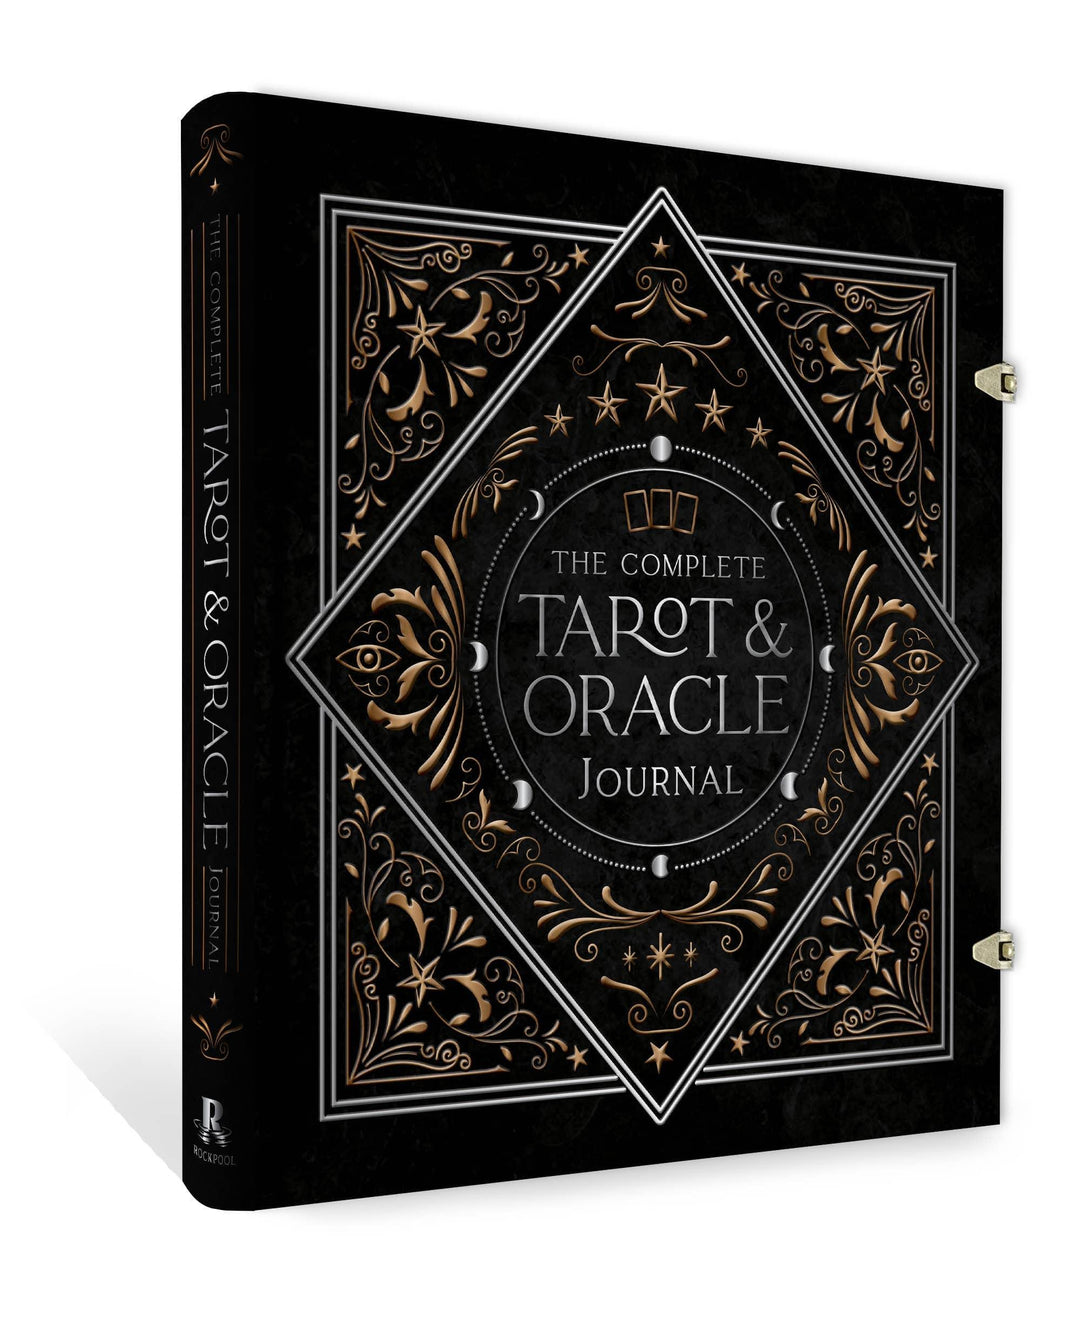 The Complete Tarot & Oracle Journal (Hardcover) - Esme and Elodie